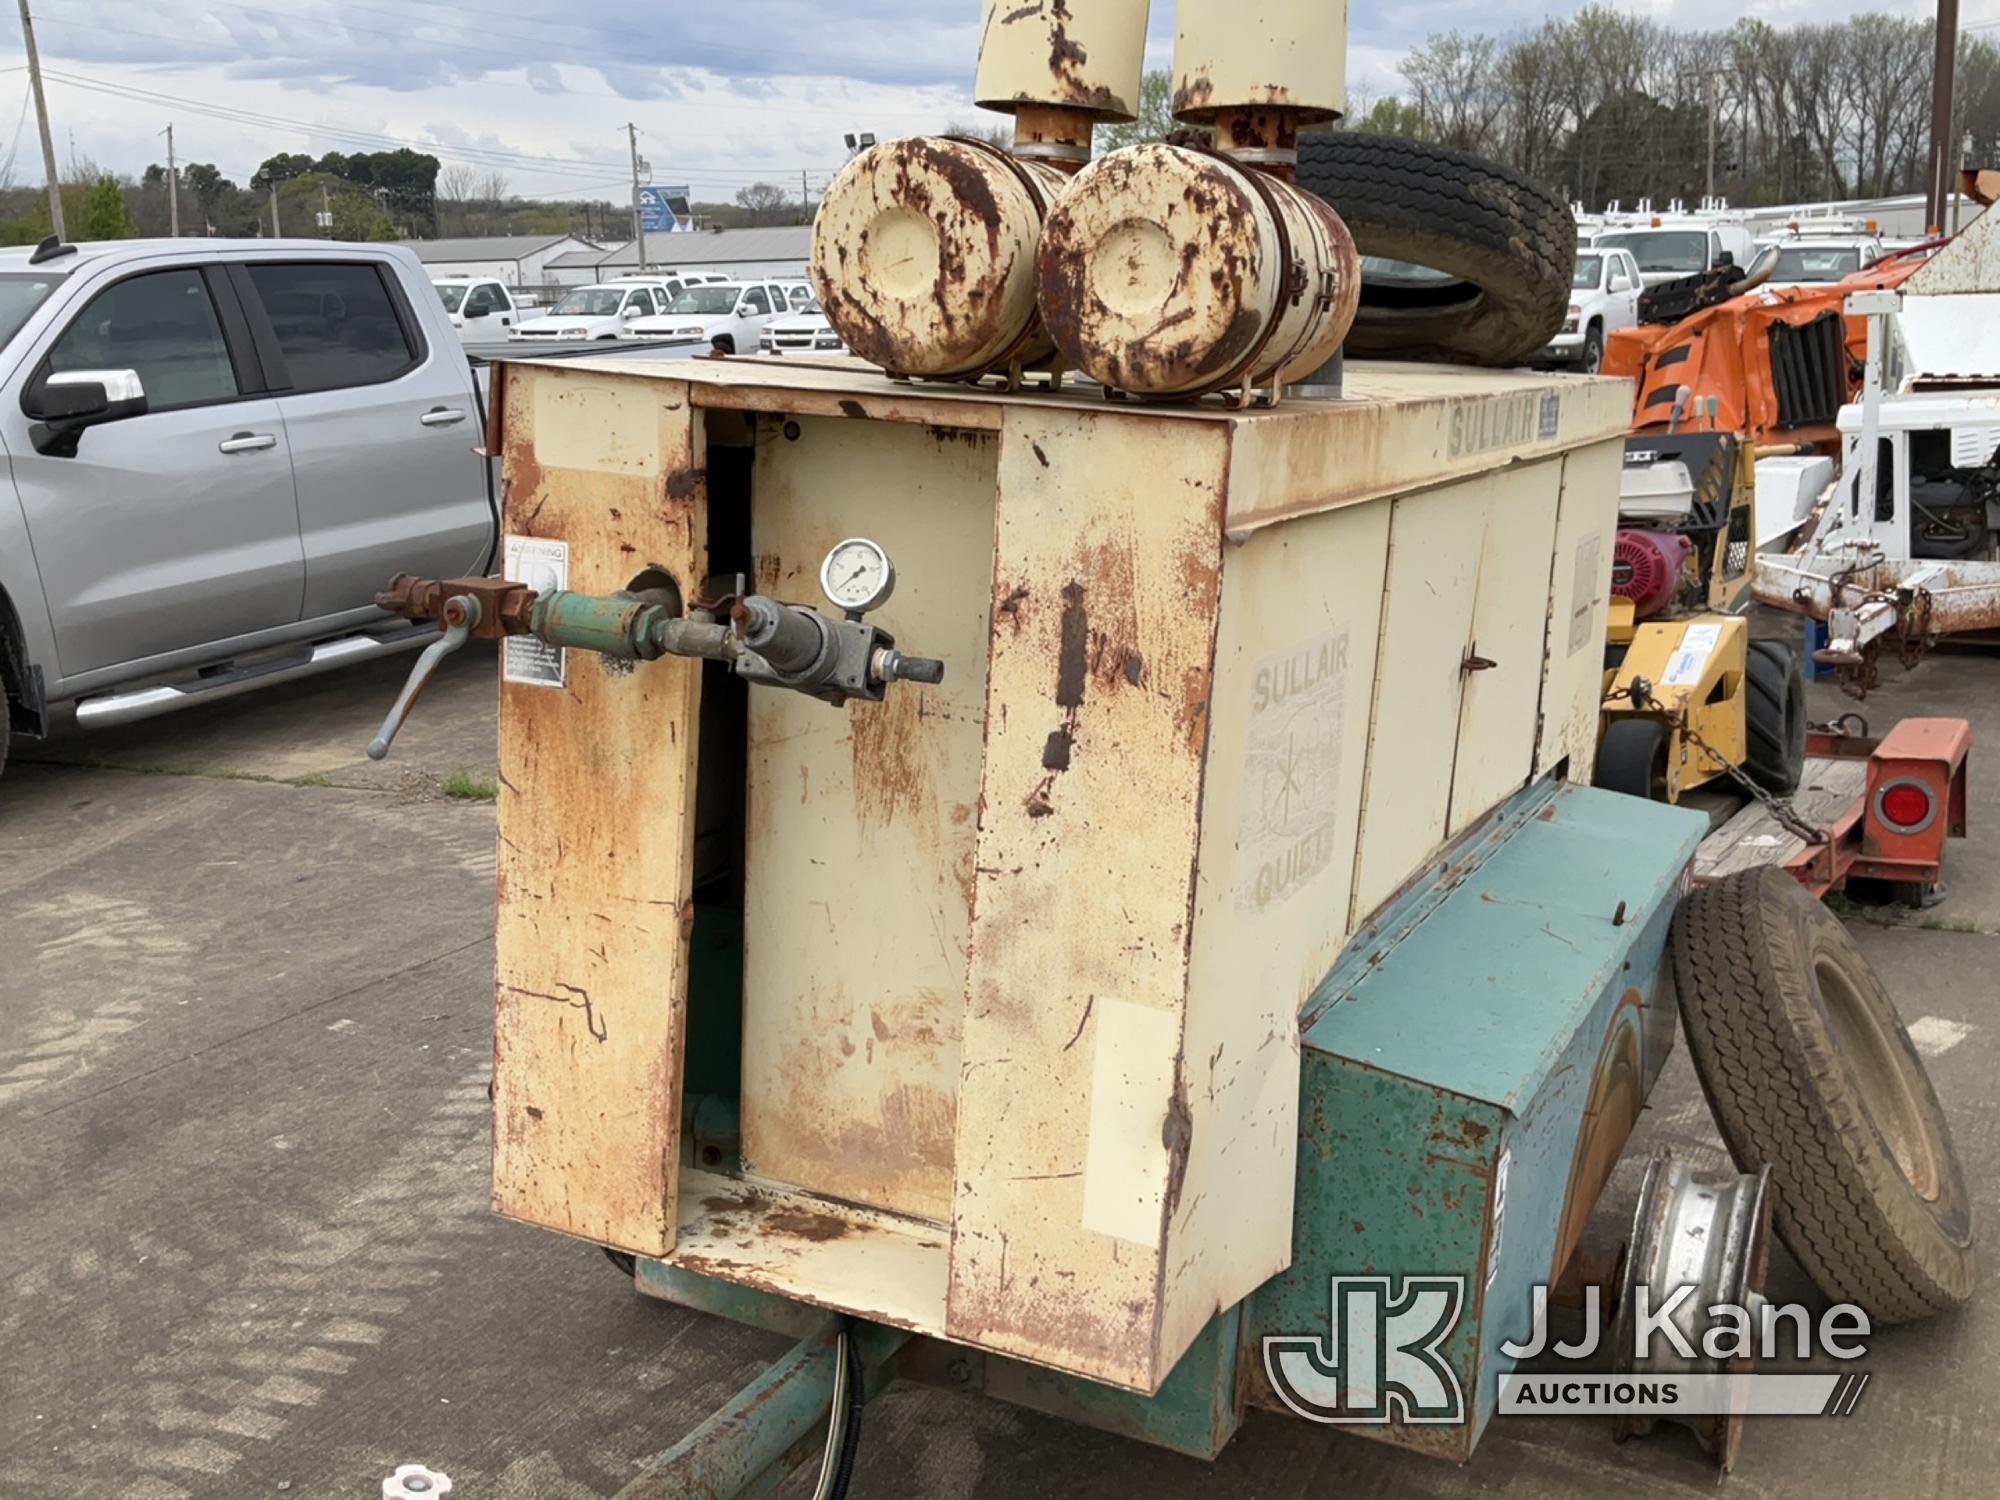 (Conway, AR) Sullair 185 Portable Air Compressor, trailer mtd No Title) (Cranks On Jump Pack, Will N